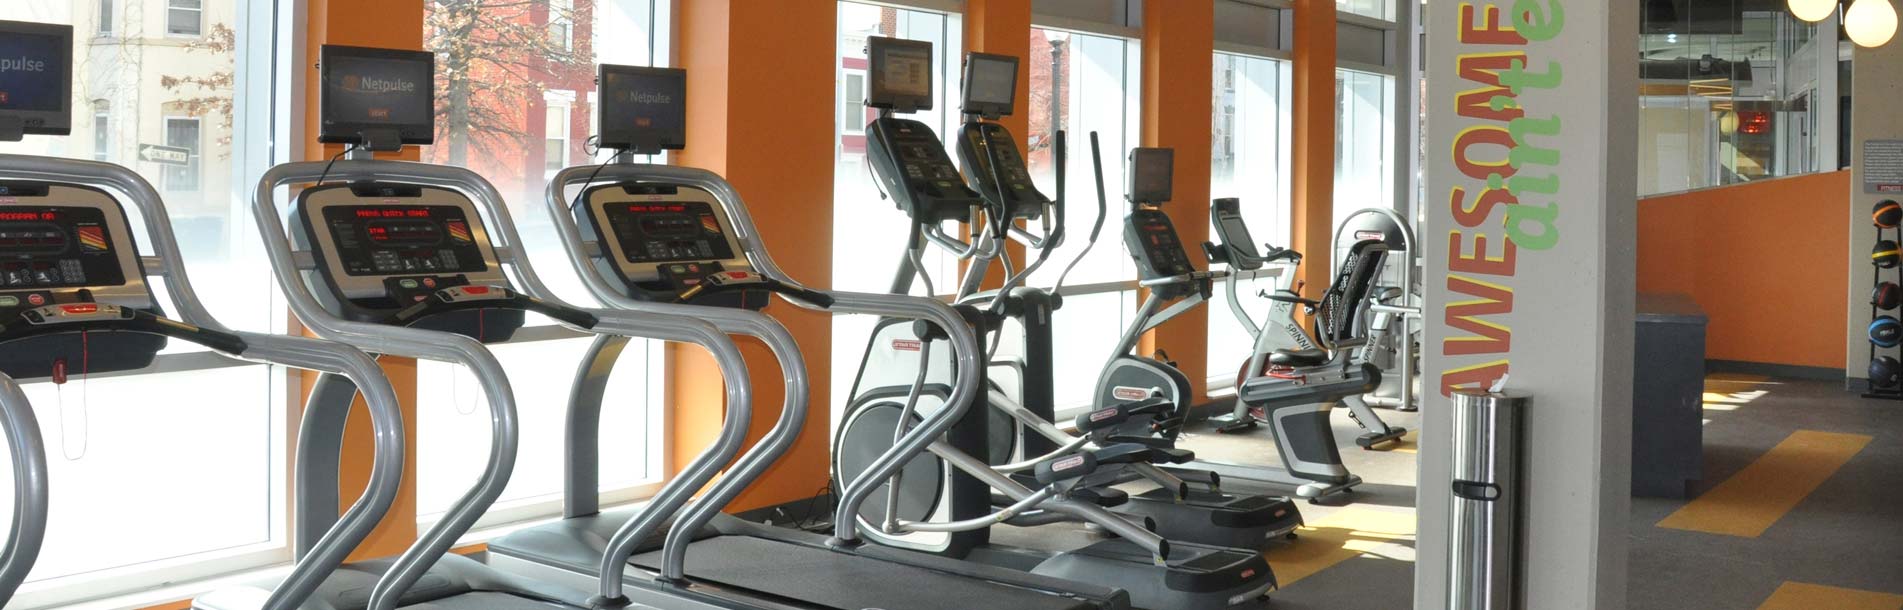 a line of treadmills along an orange wall with windows letting light in